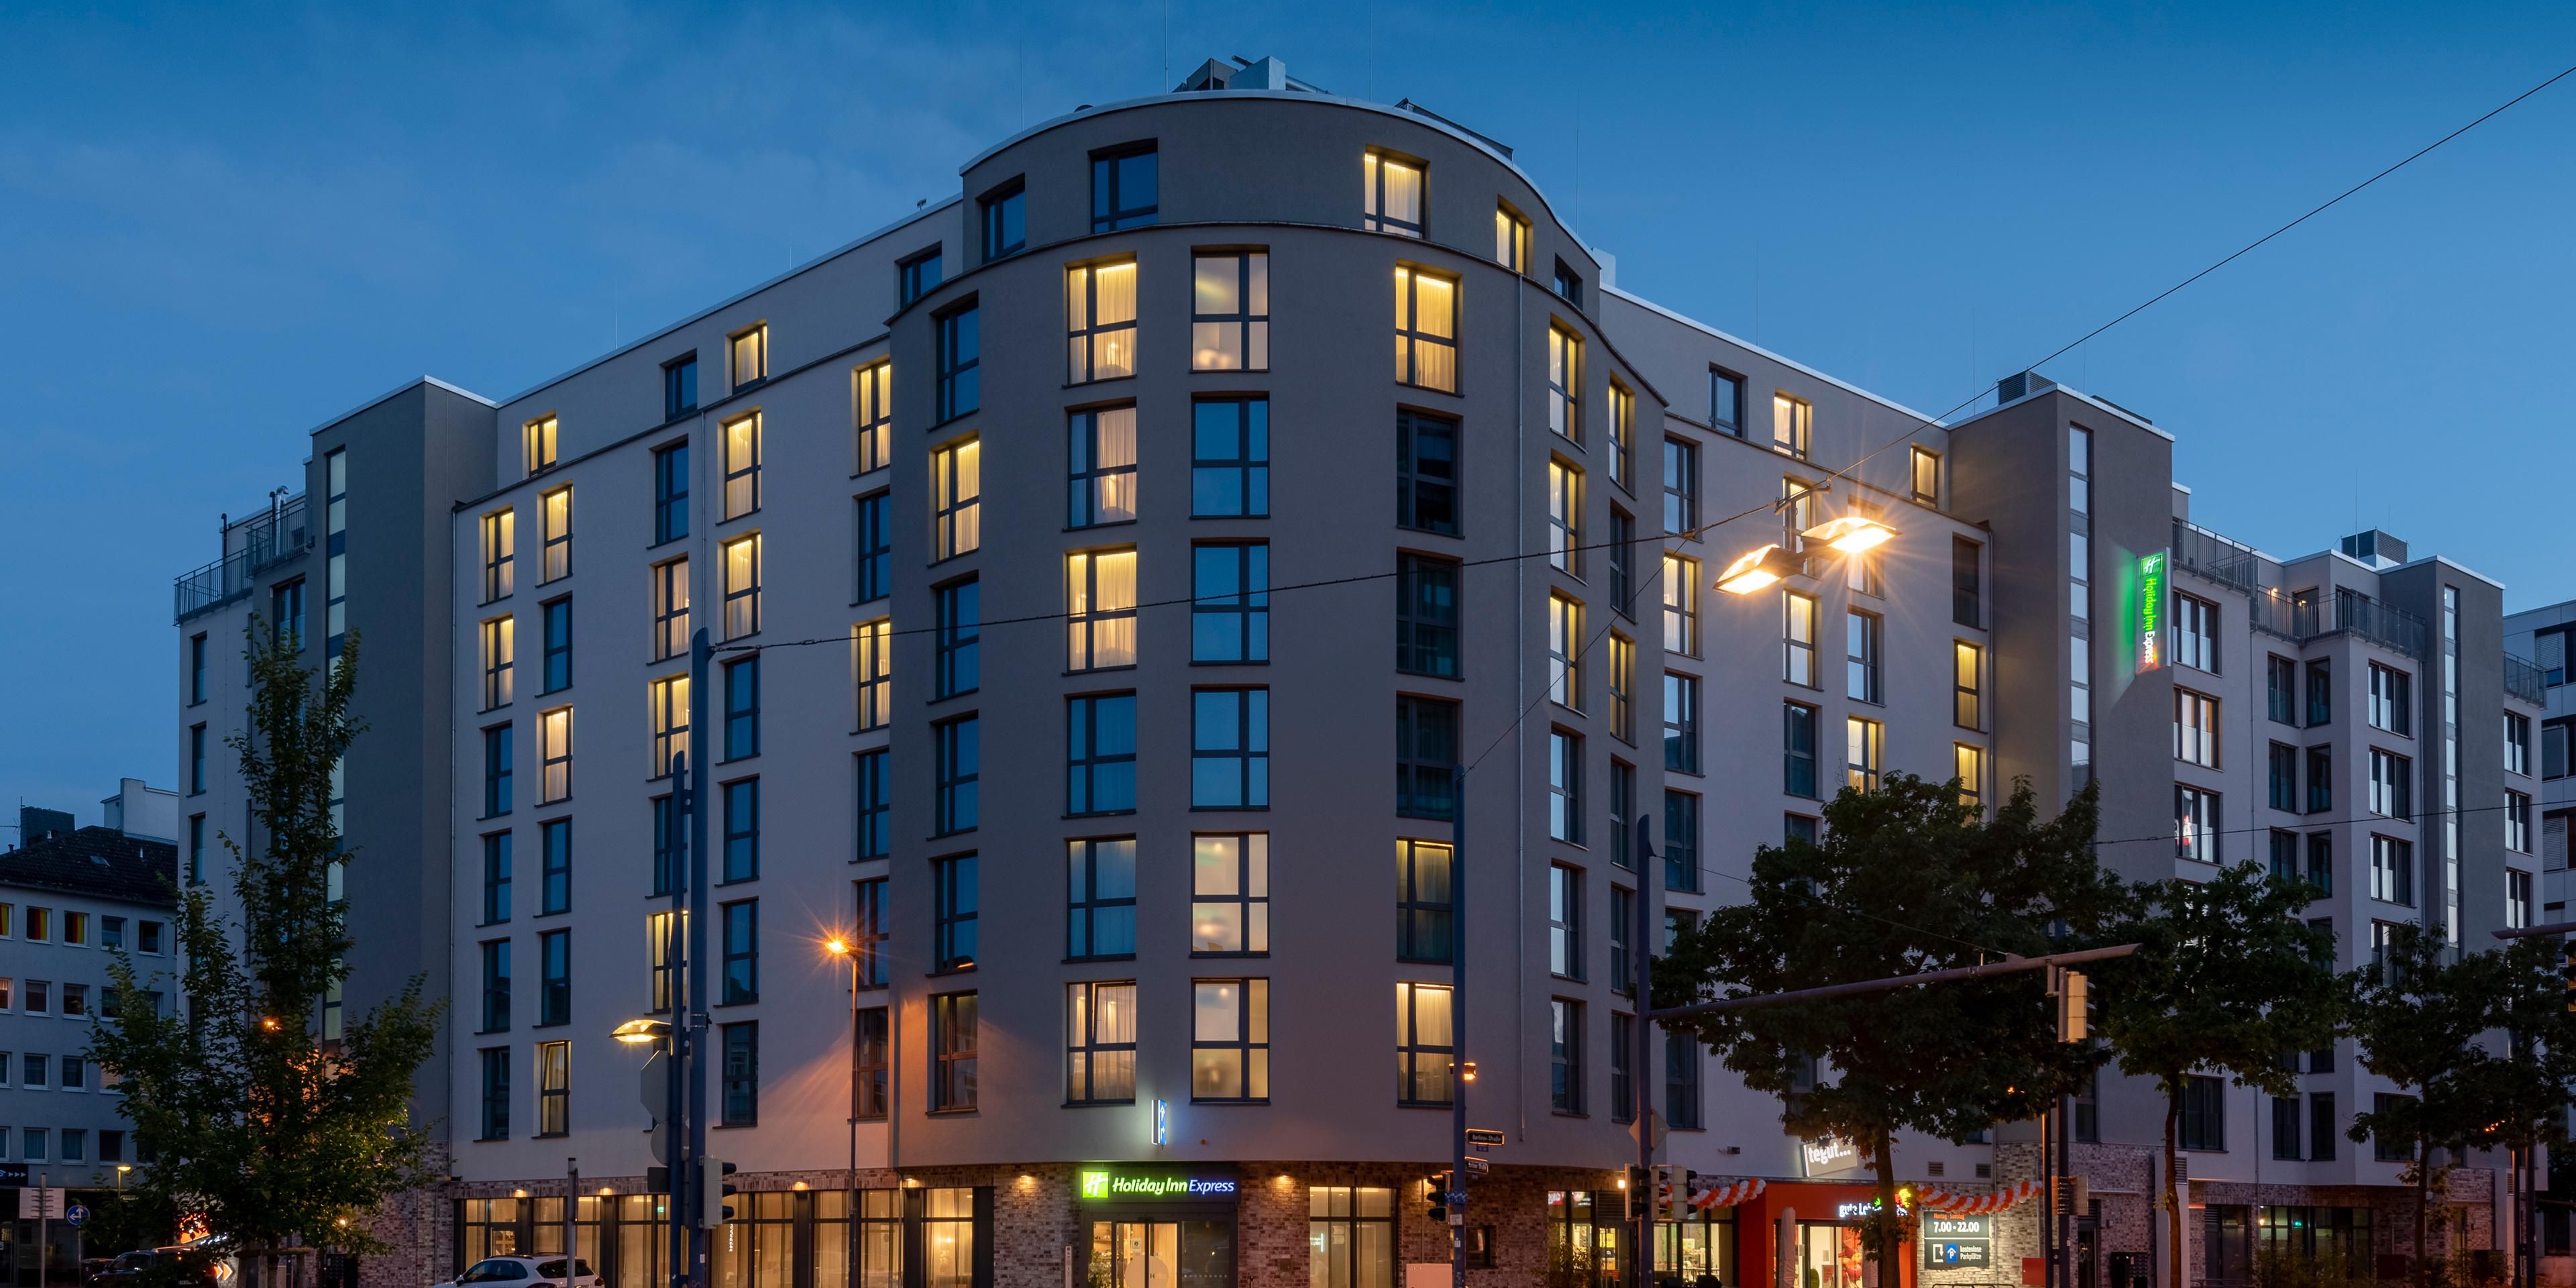 Holiday Inn Express Offenbach - Offenbach, Germany